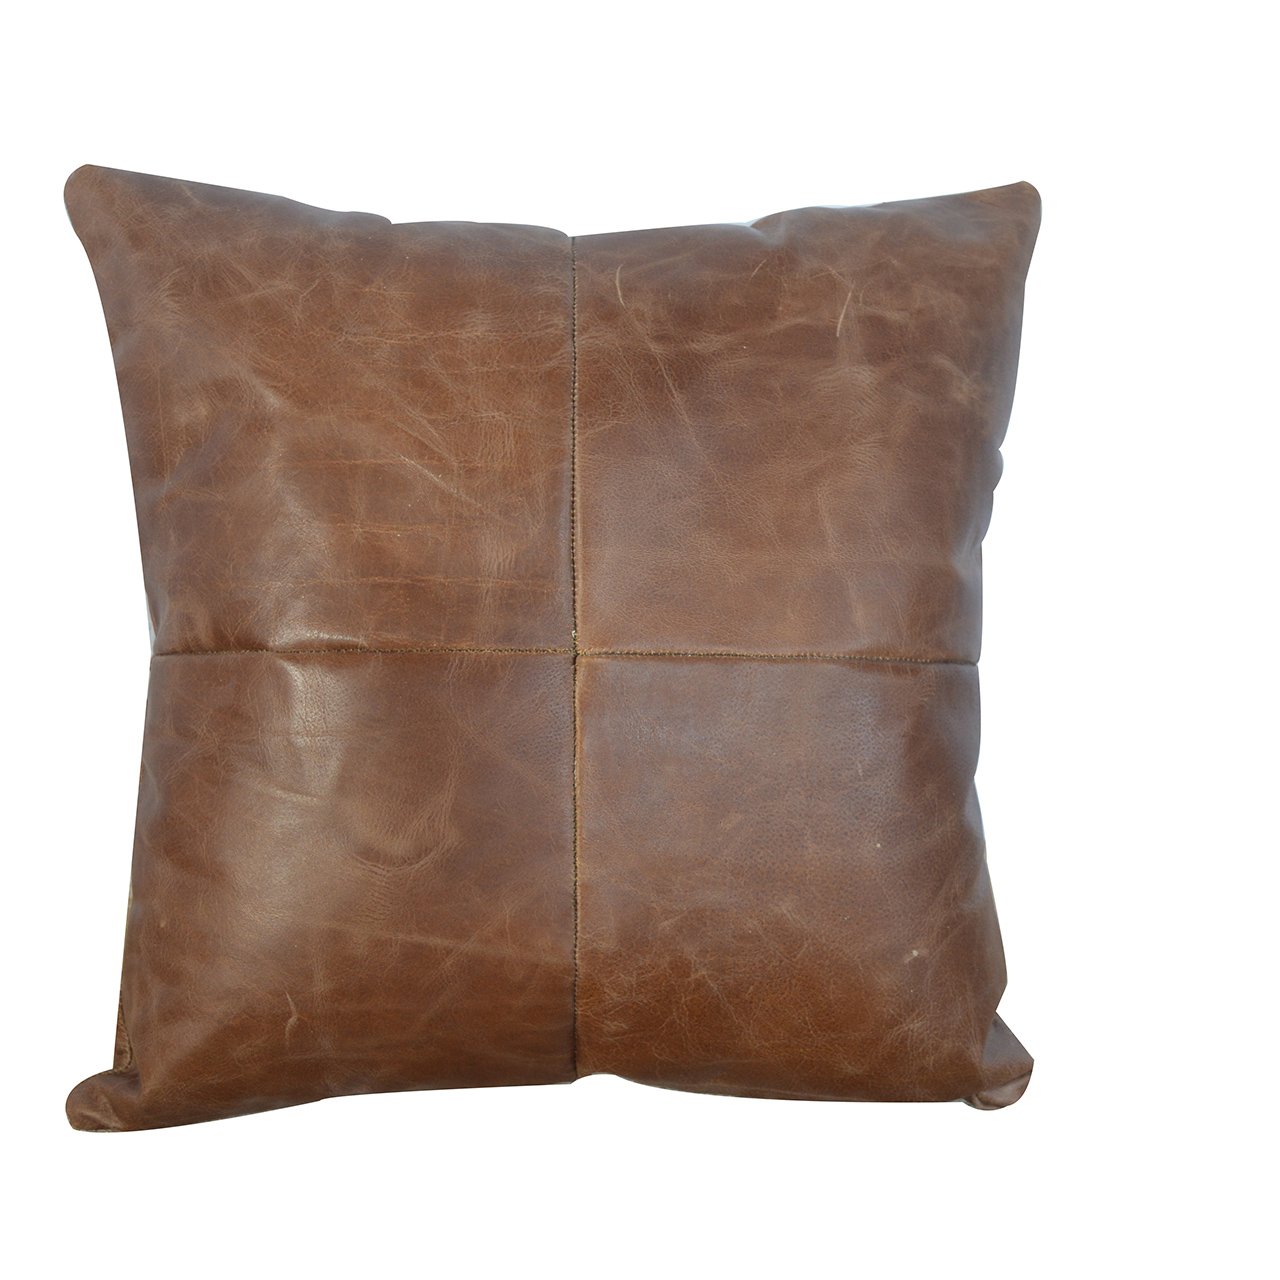 Buffalo Hide Leather Scatter Cushion